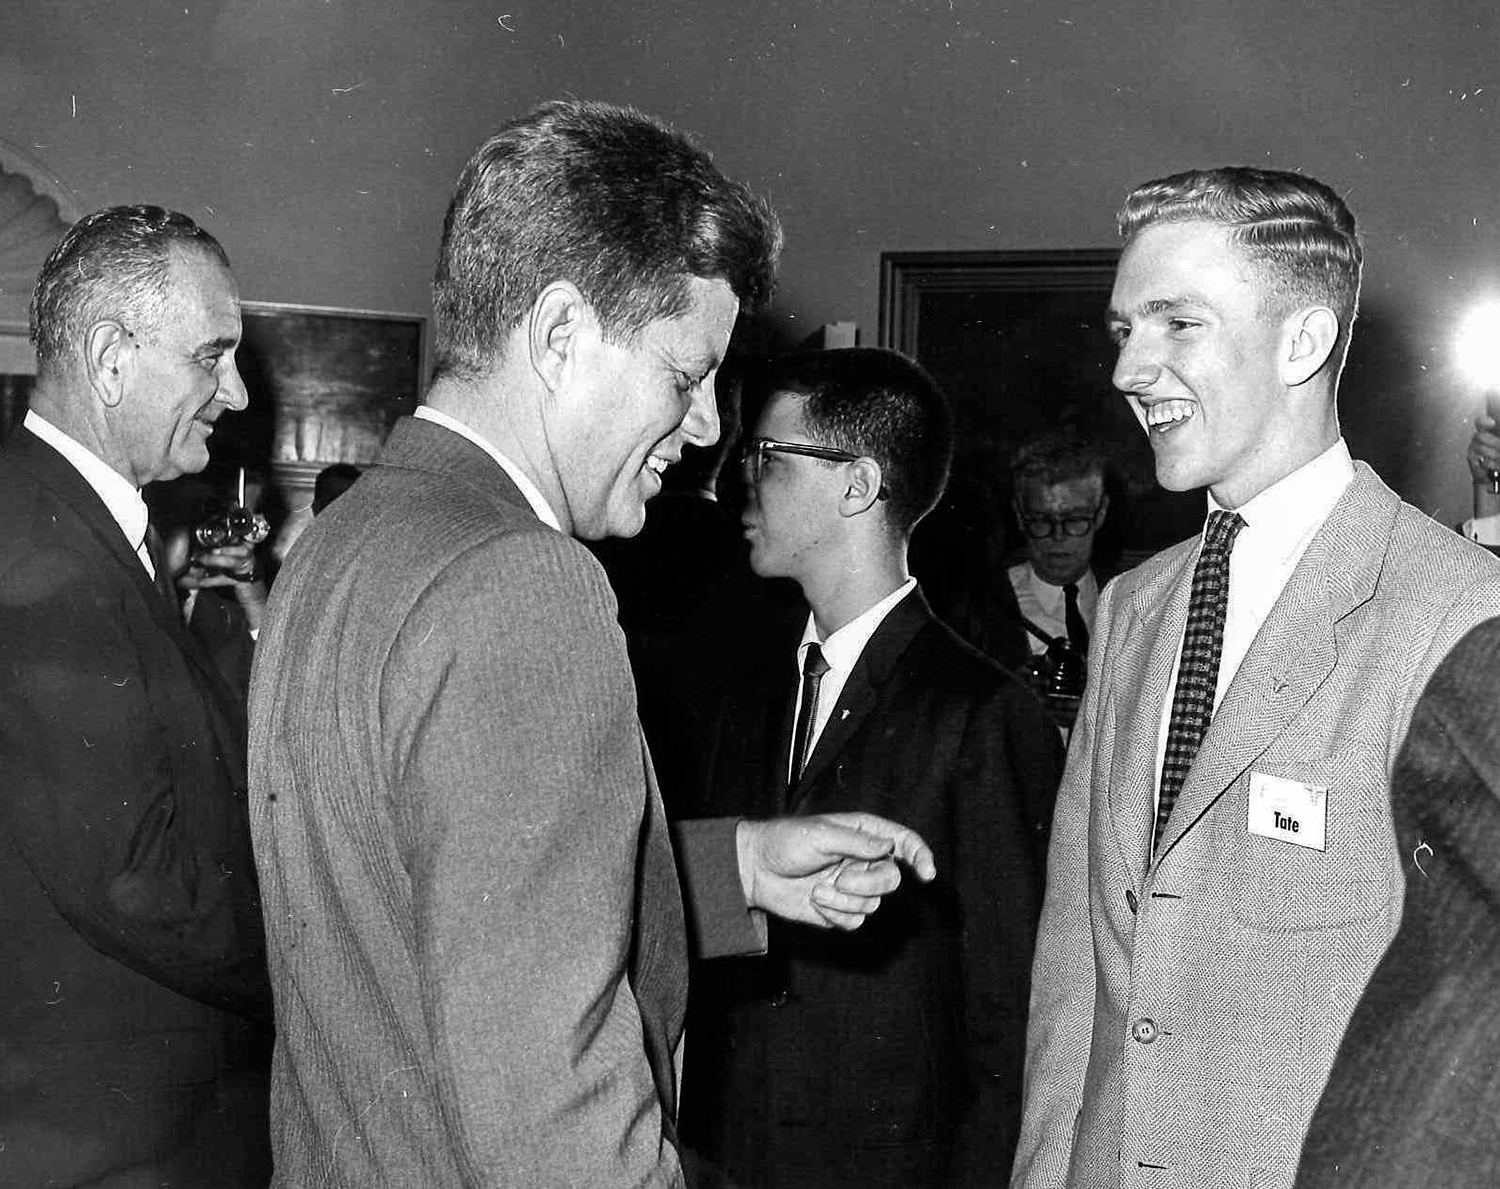 STS finalist William Tate meets President Kennedy 